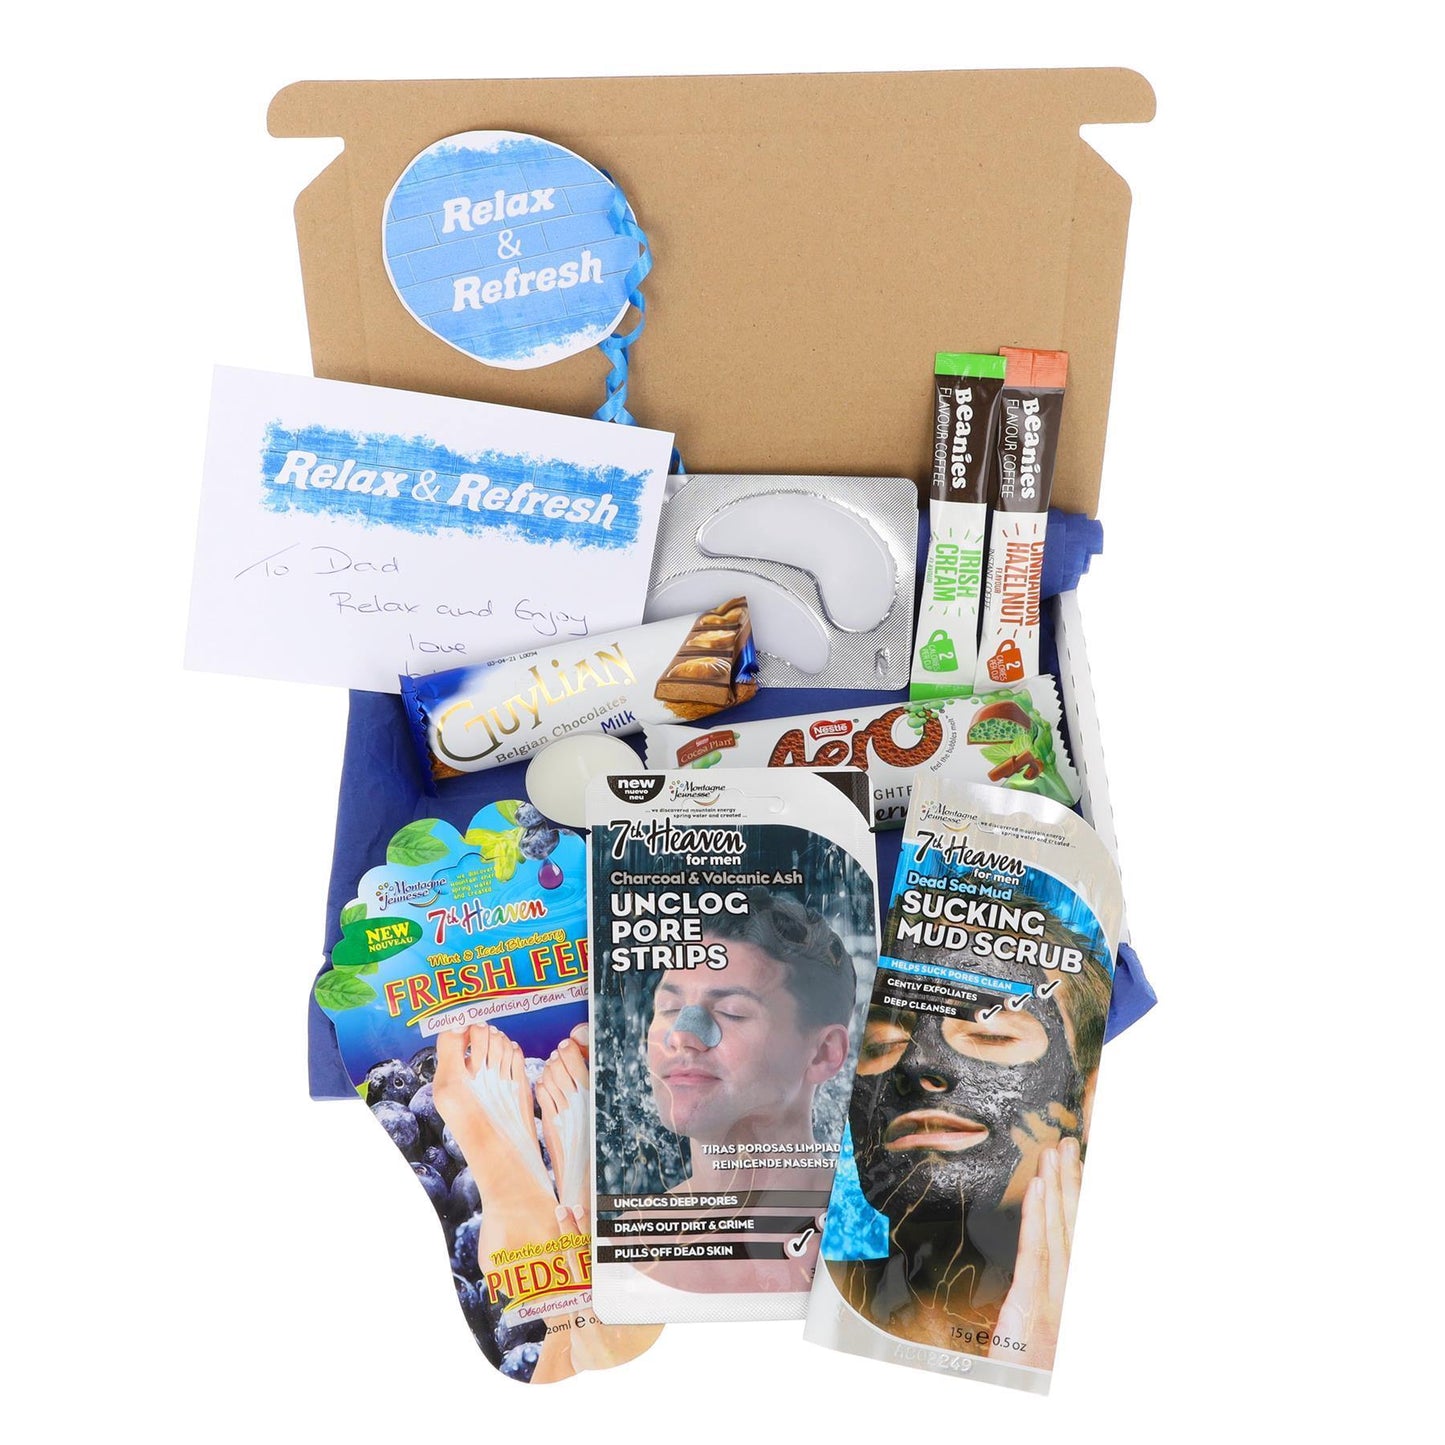 Pamper Treat & Sweet Box for Men Letterbox Gift  - Always Looking Good - Coffee Sachets  